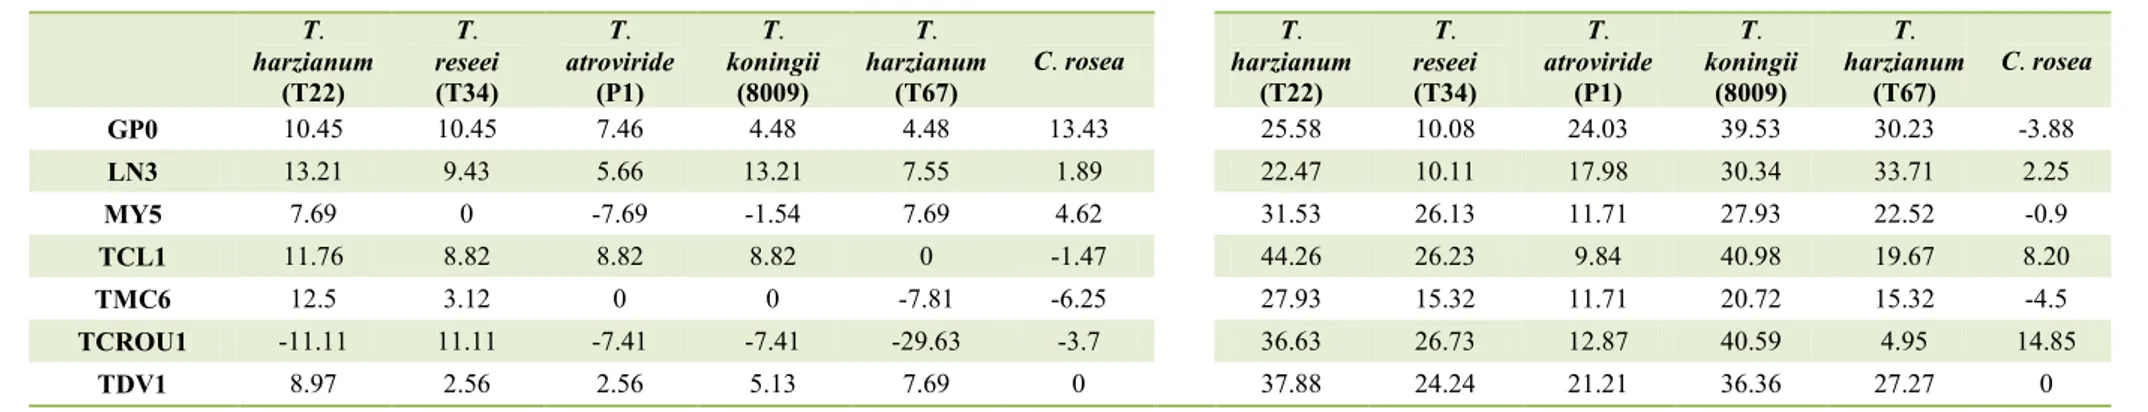 Table 1 - Mycoparasitism of several Trichoderma spp. against different Calonectria spp